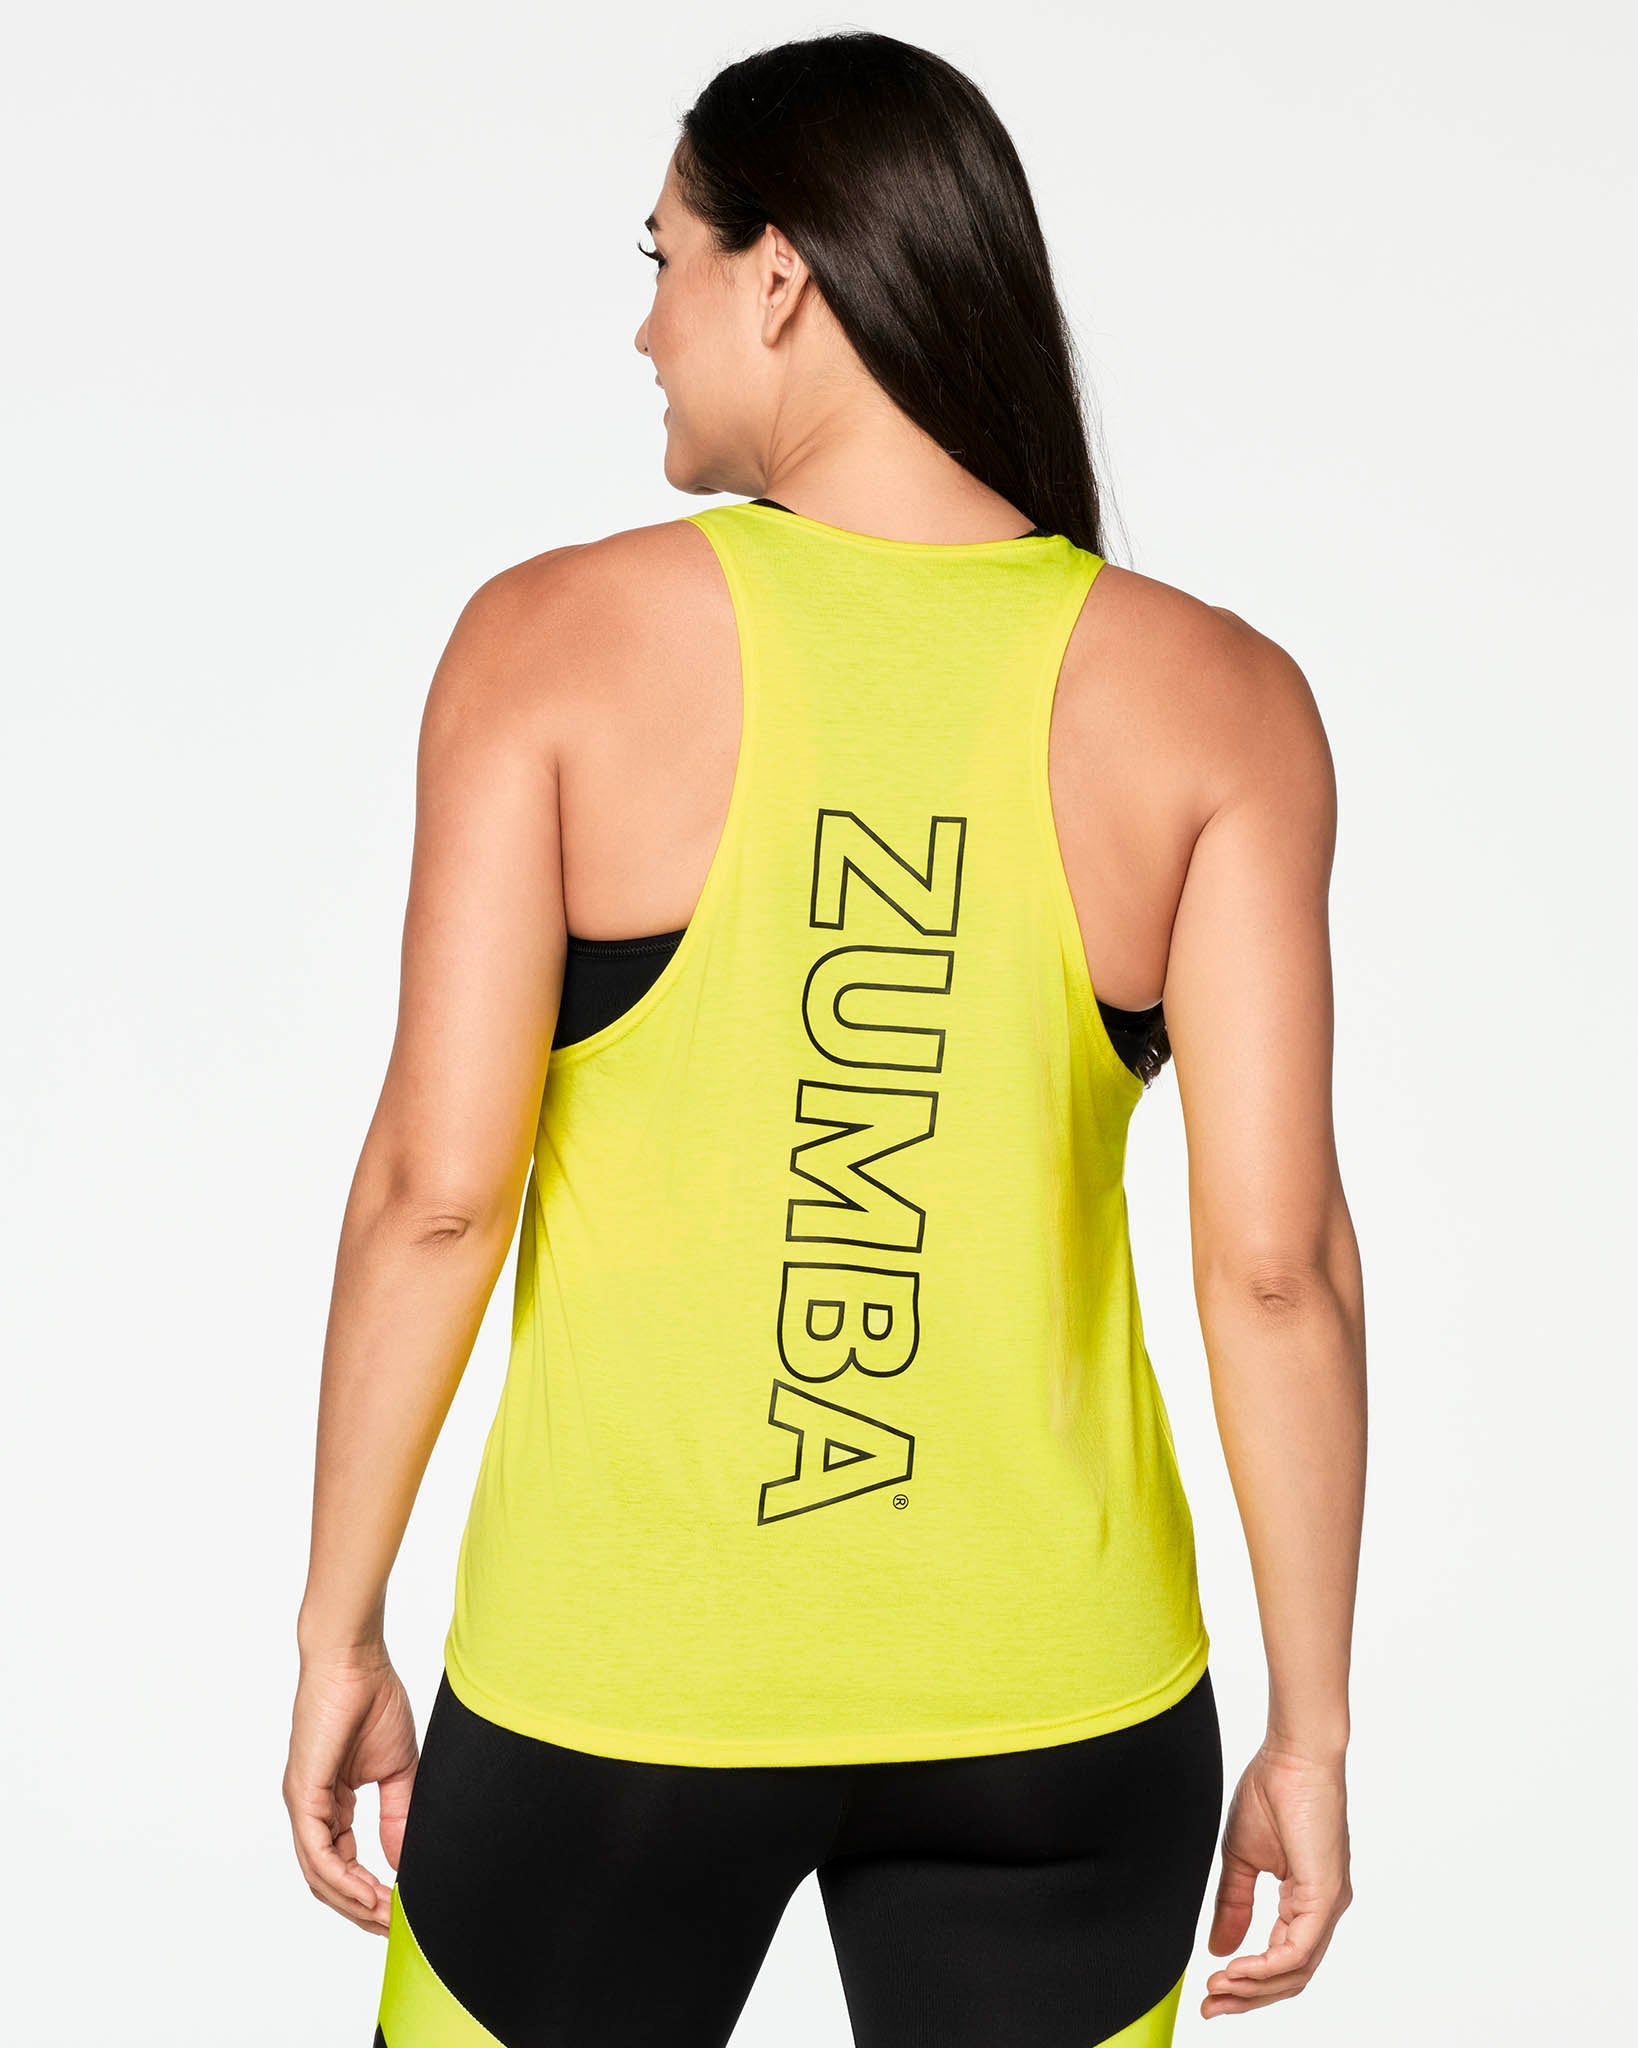 Buy STRONG by Zumba Easy Fit Womens Tops Athletic Workout Tank